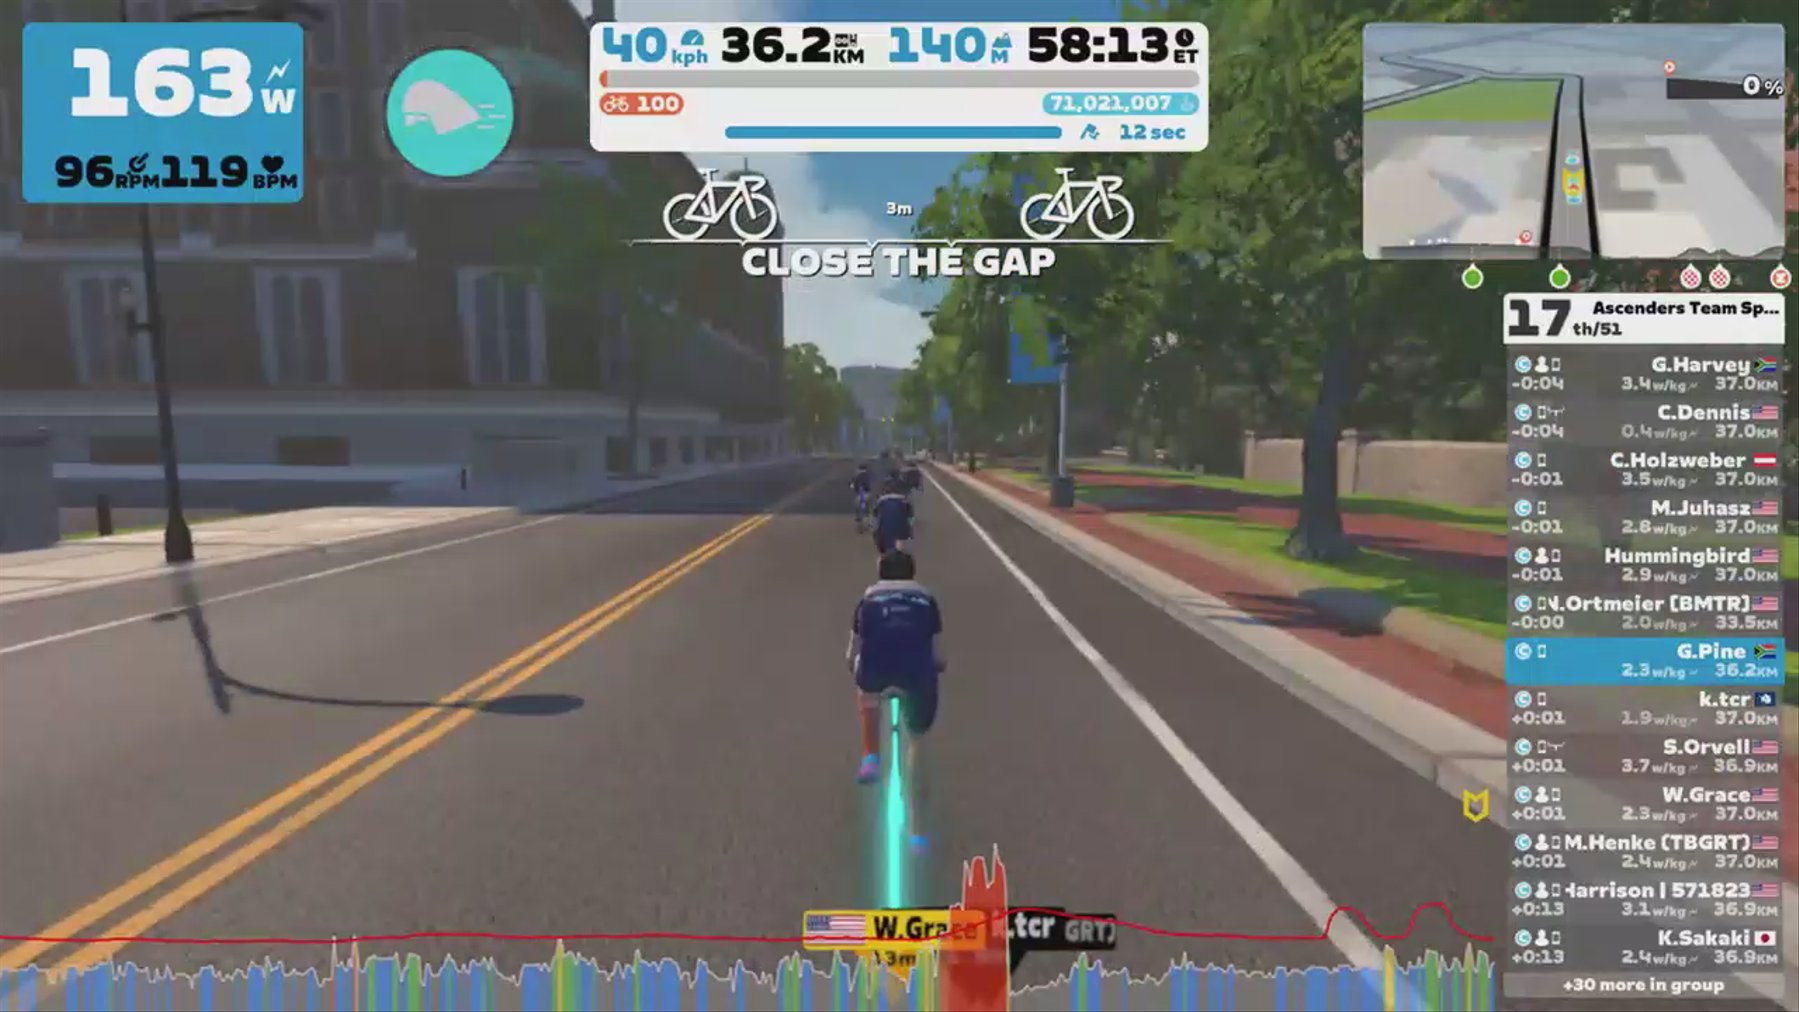 Zwift - Group Ride: Ascenders Team Spin & Sprint (C) on The Fan Flats in Richmond